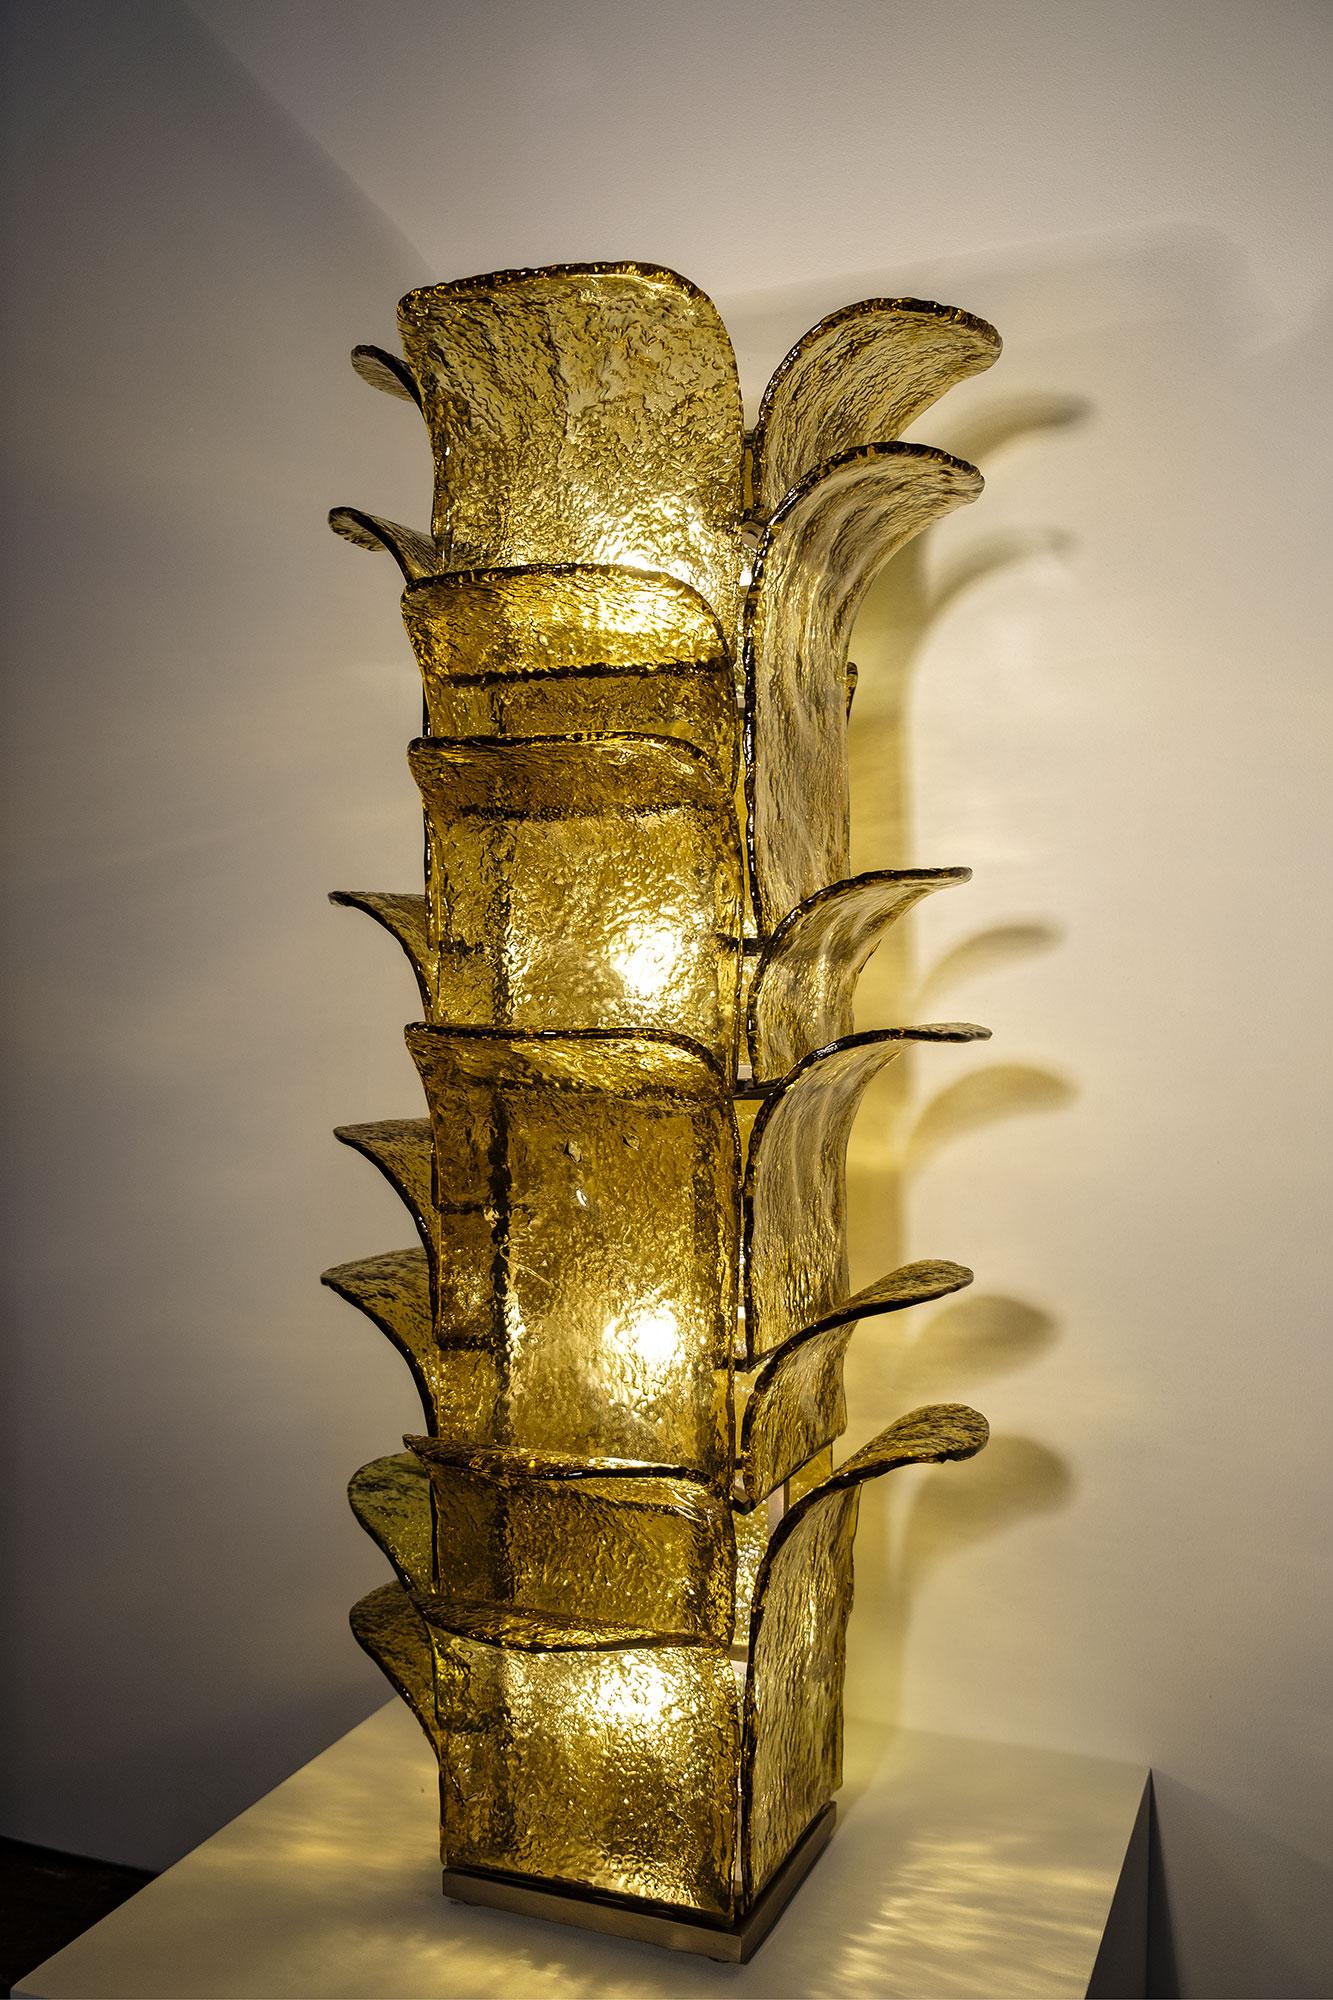 Majestic Murano Glass lamp LT320 by Carlo Nason for Mazzega, Italy 1960’s
Made of large yellow glass petals hooked into an aluminium structure which gives a form of a cactus. 
This stunning sculptural lamp produces a beautiful warm light.
